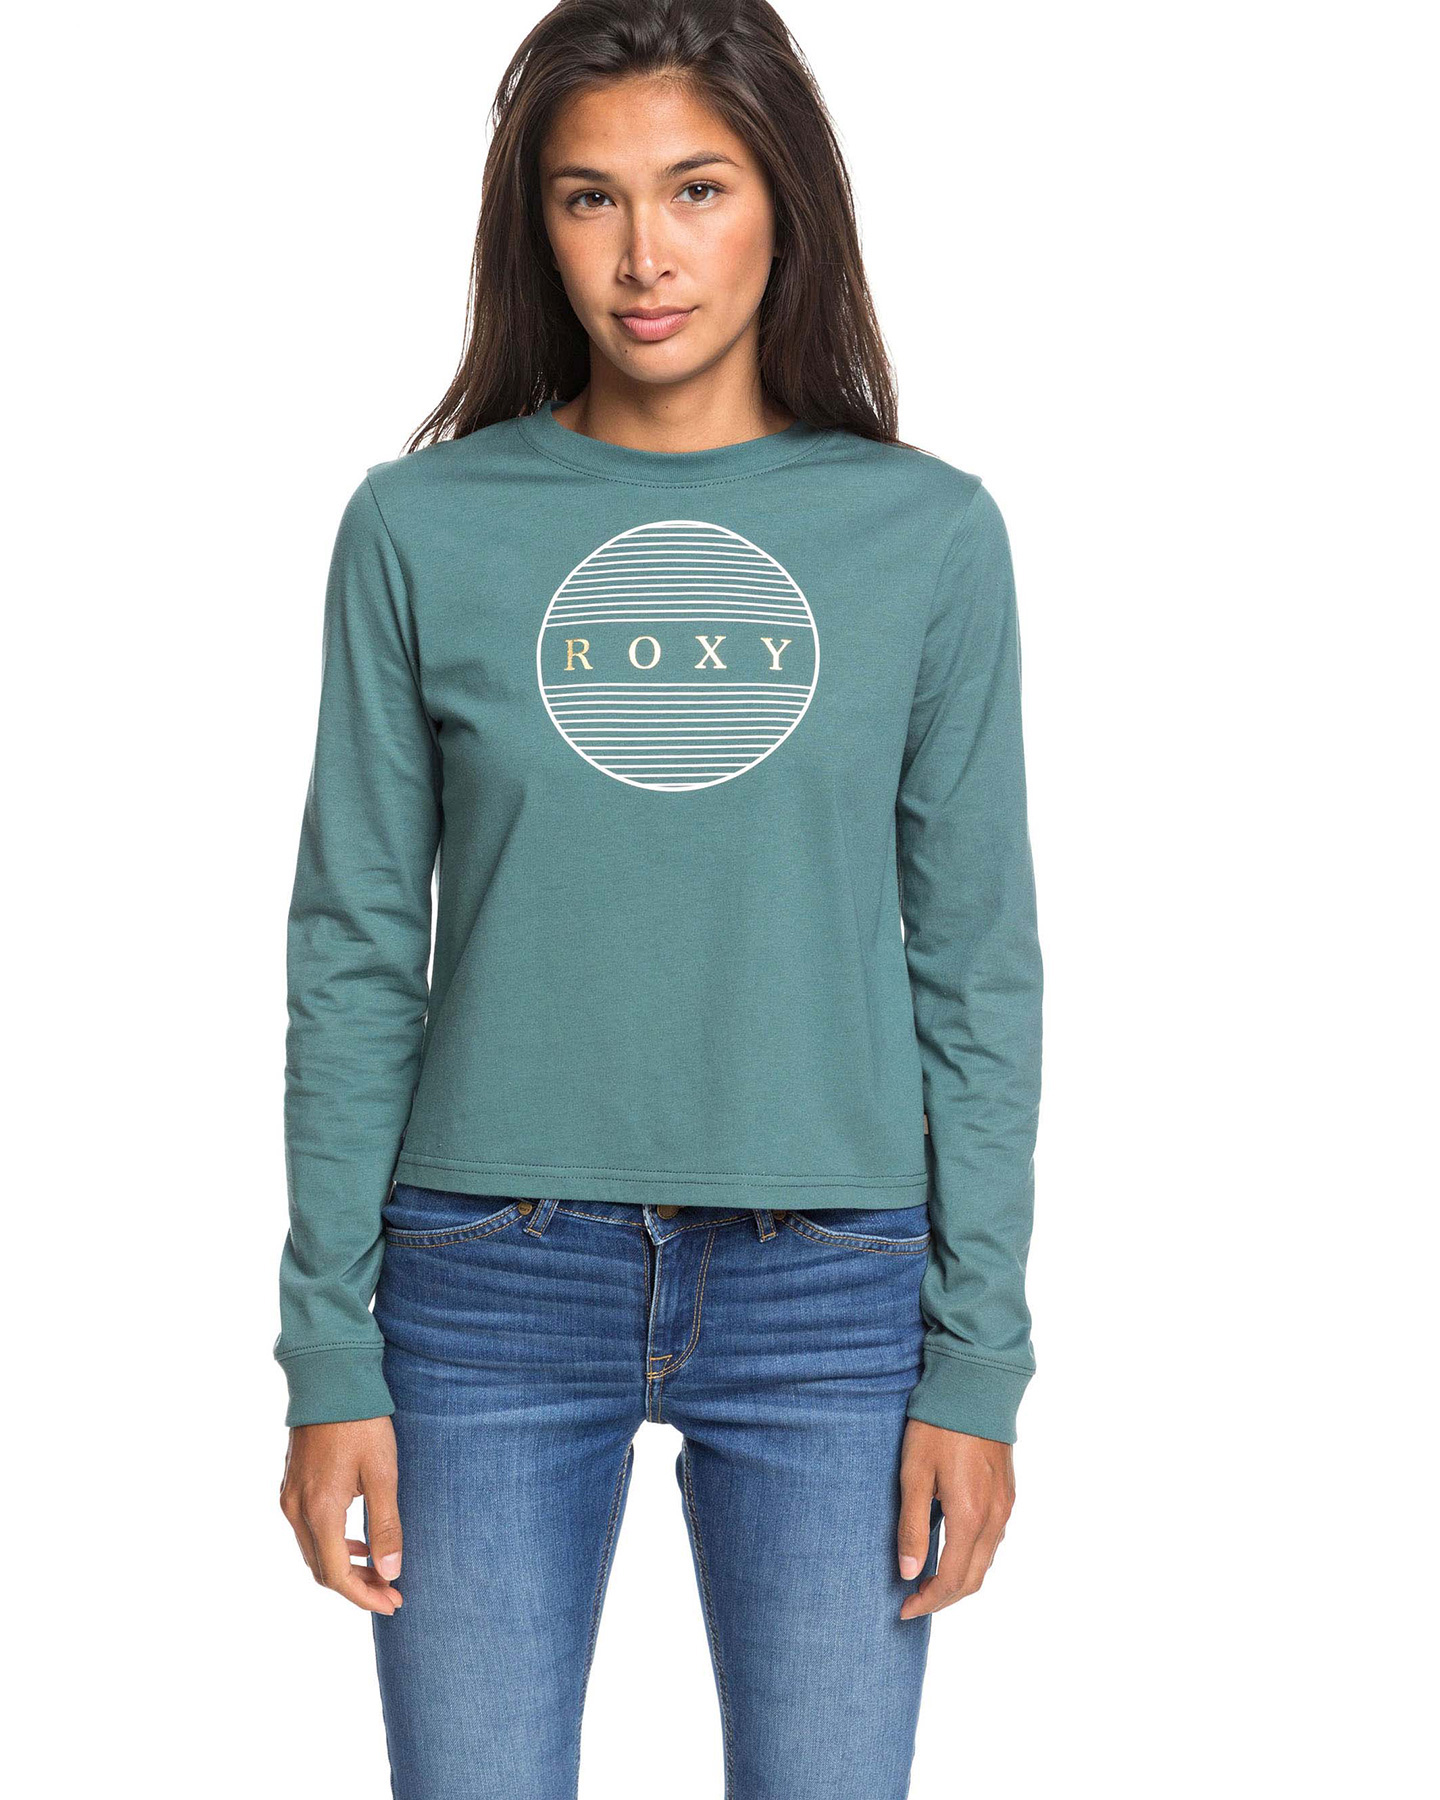 Roxy Womens This Is Cool Cropped Long Sleeve T Shirt - North Atlantic ...